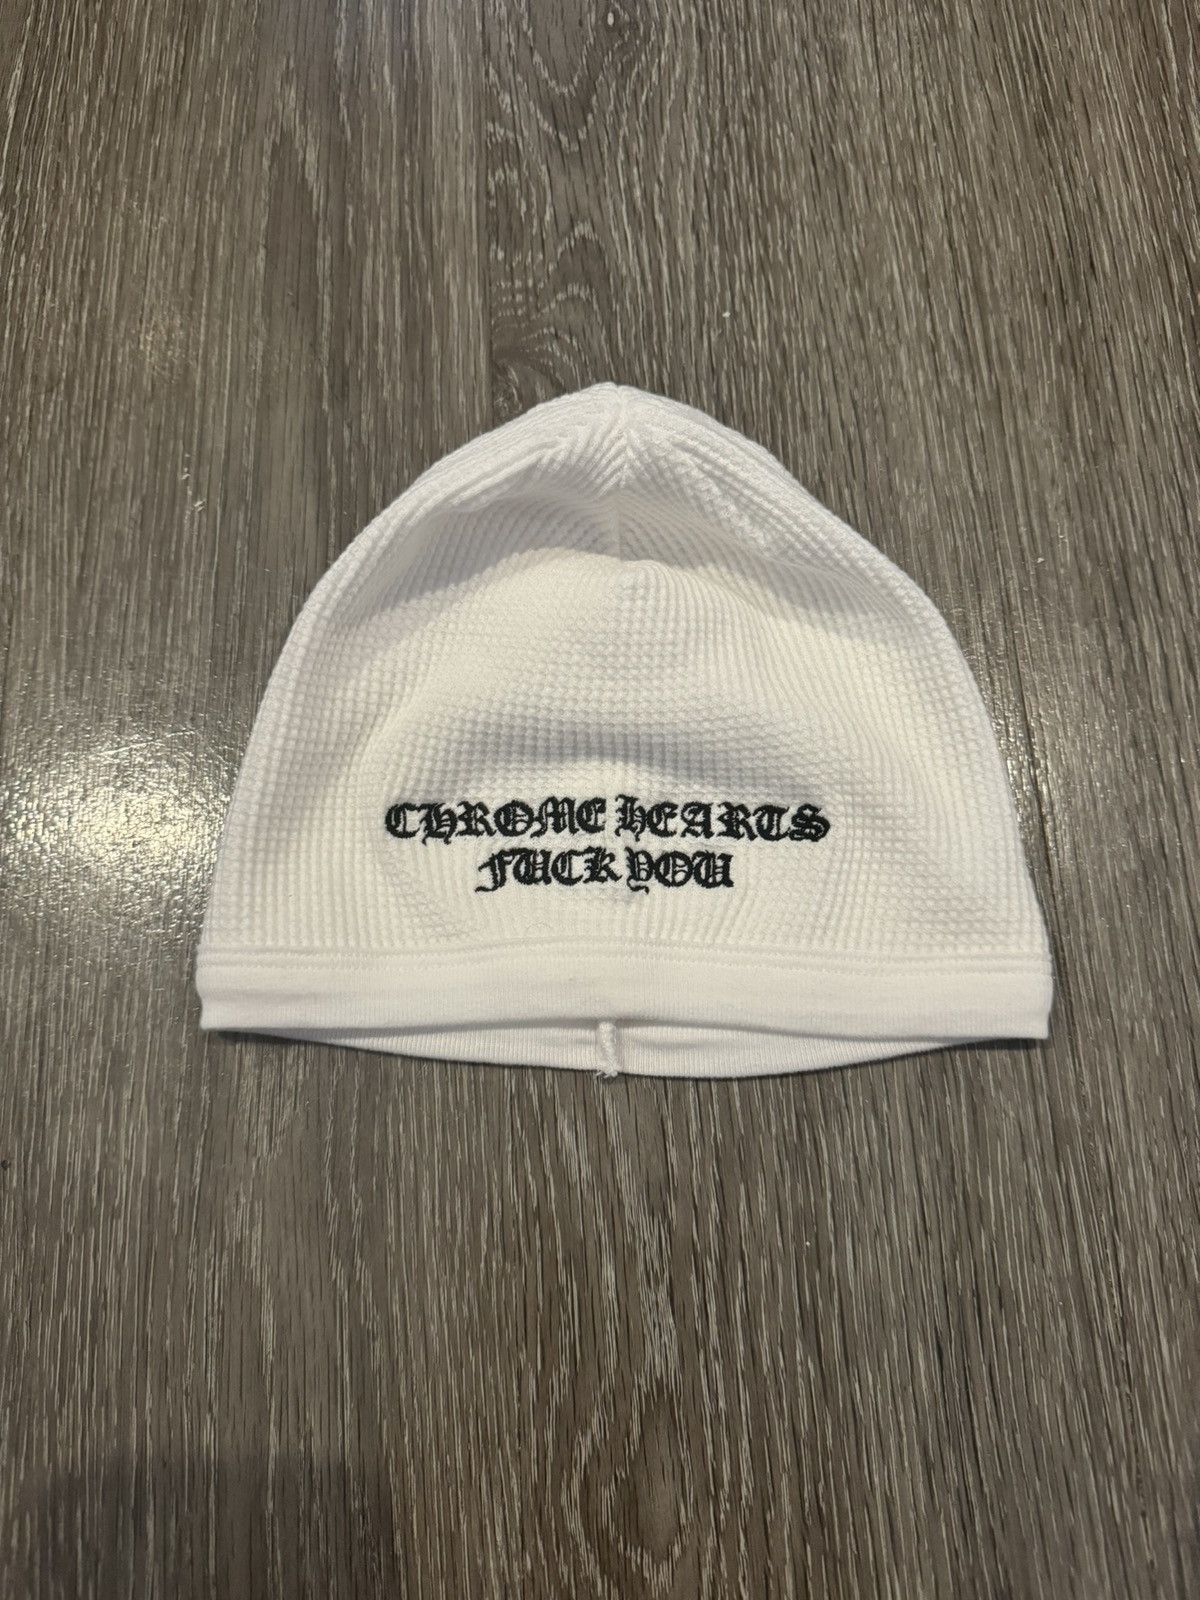 Pre-owned Chrome Hearts Vintage Waffle Thermal Beanie Hat White